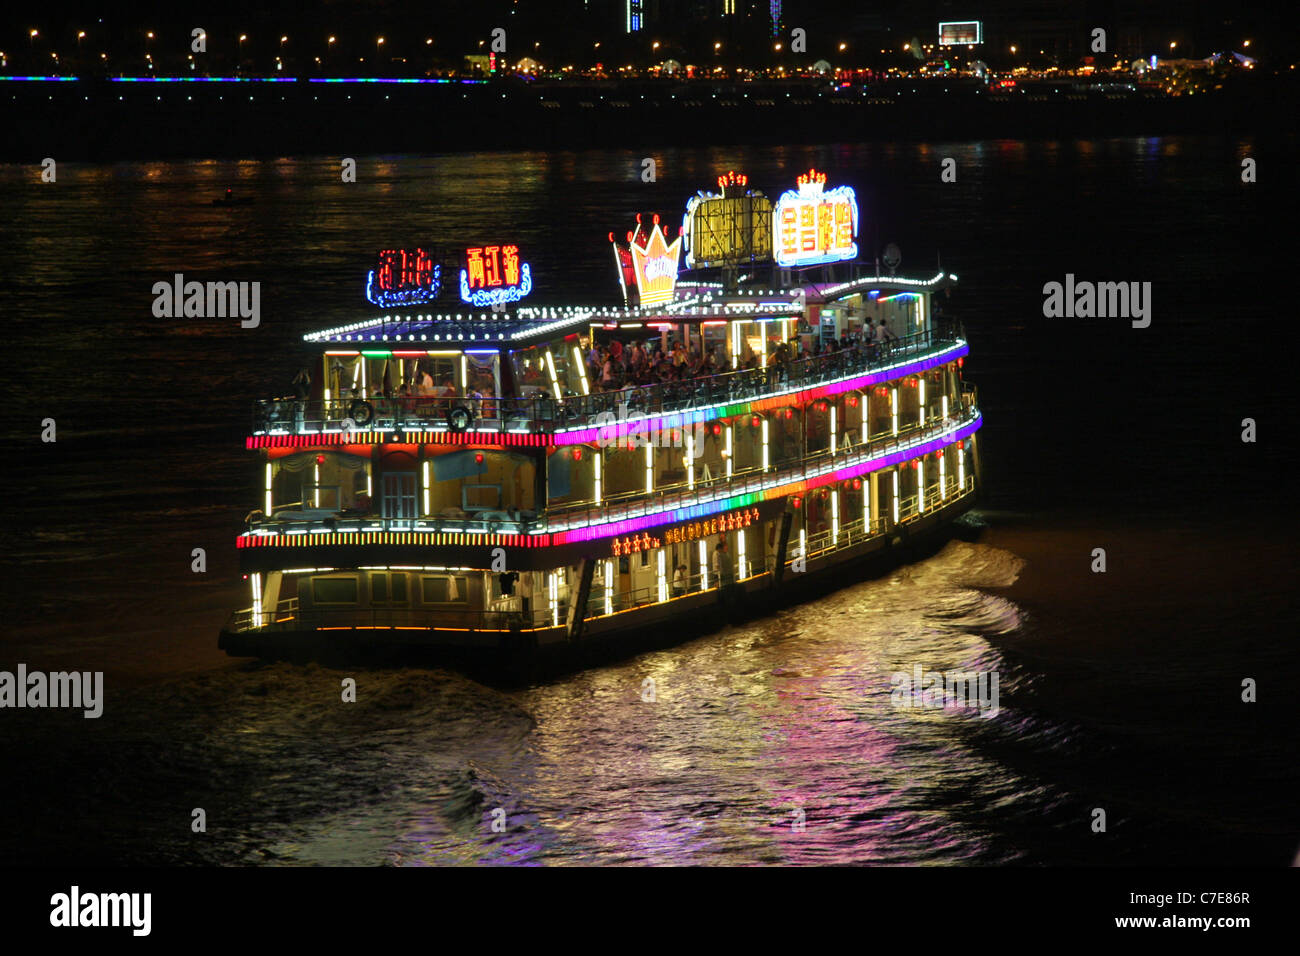 Night scene of a well lit dinner cruise boat on the Yangtze River at Chongqing, China Stock Photo